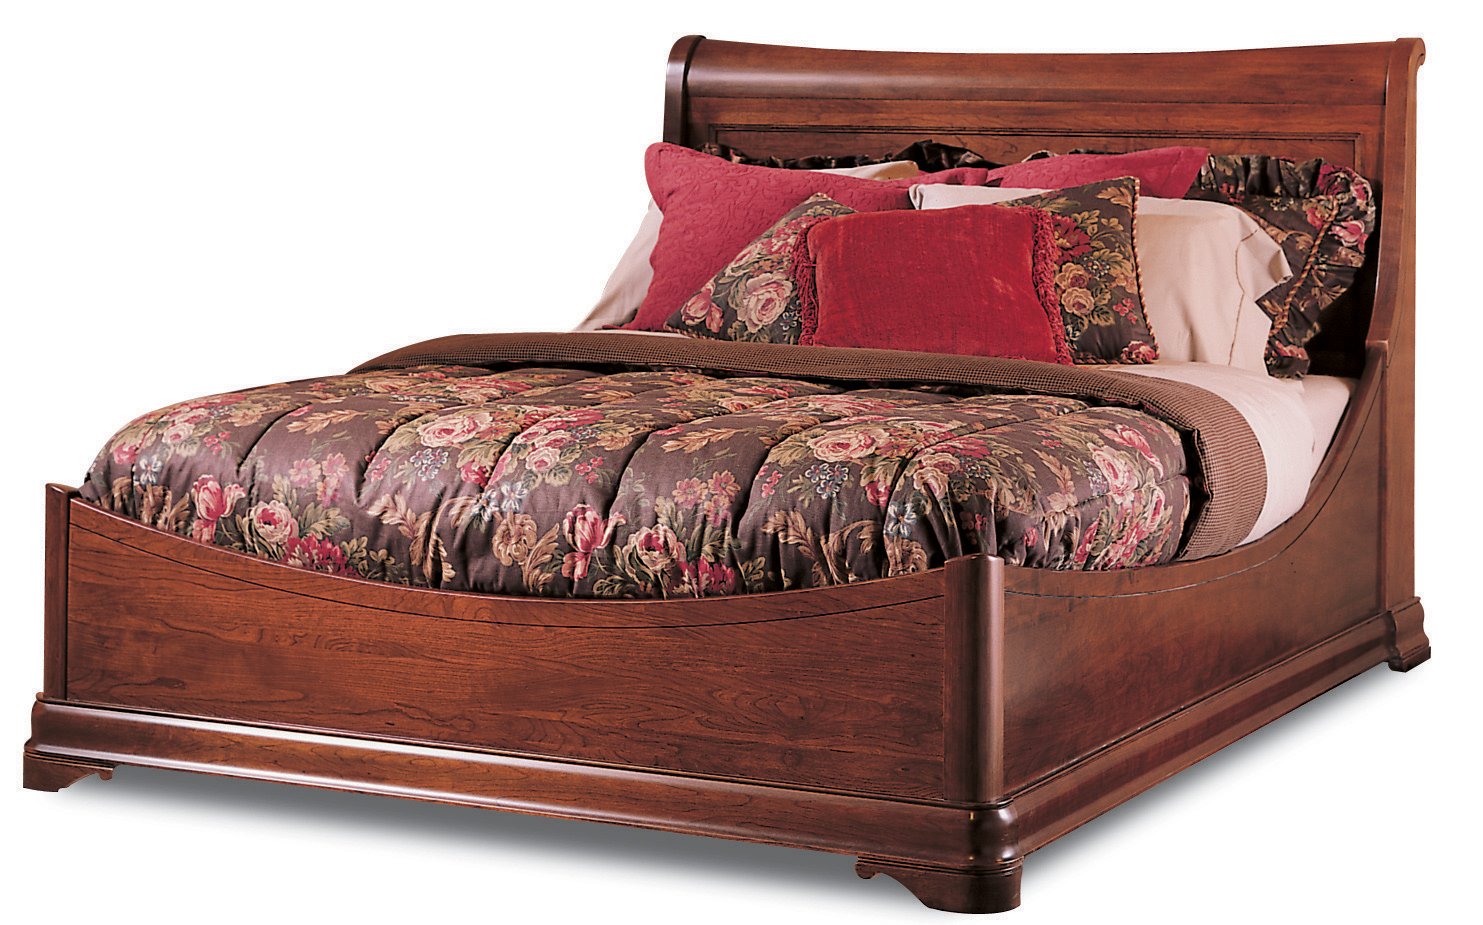 Chateau Fontaine Queen Euro Bed